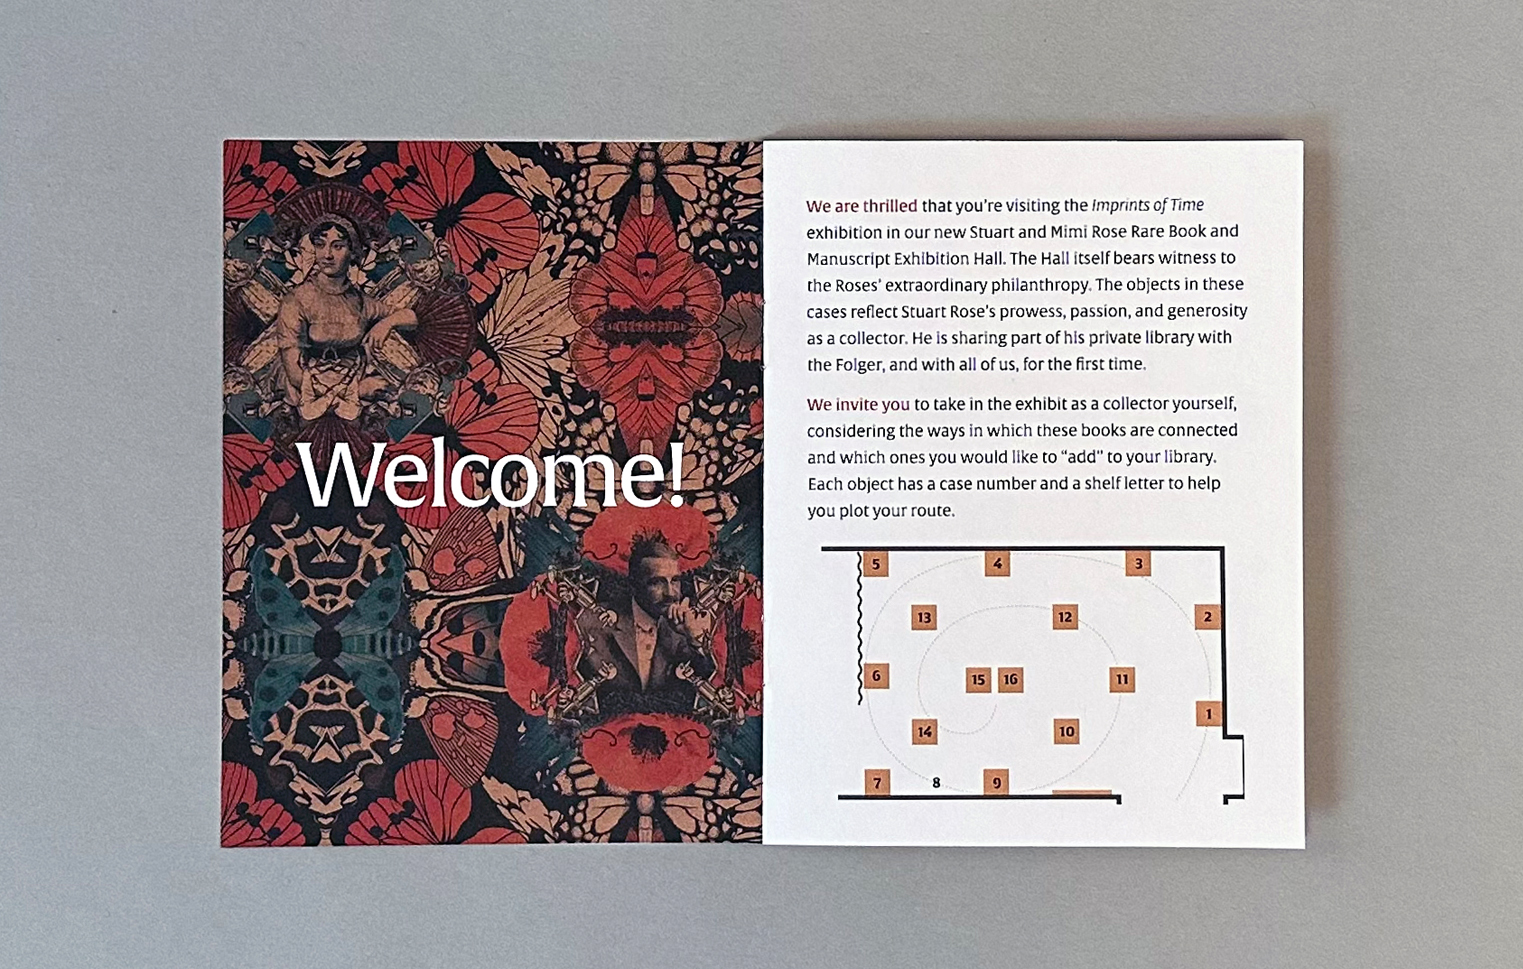 Opening pages of the booklets with a splash page of the wallpaper and the word "Welcome!" and a map of the exhibition.